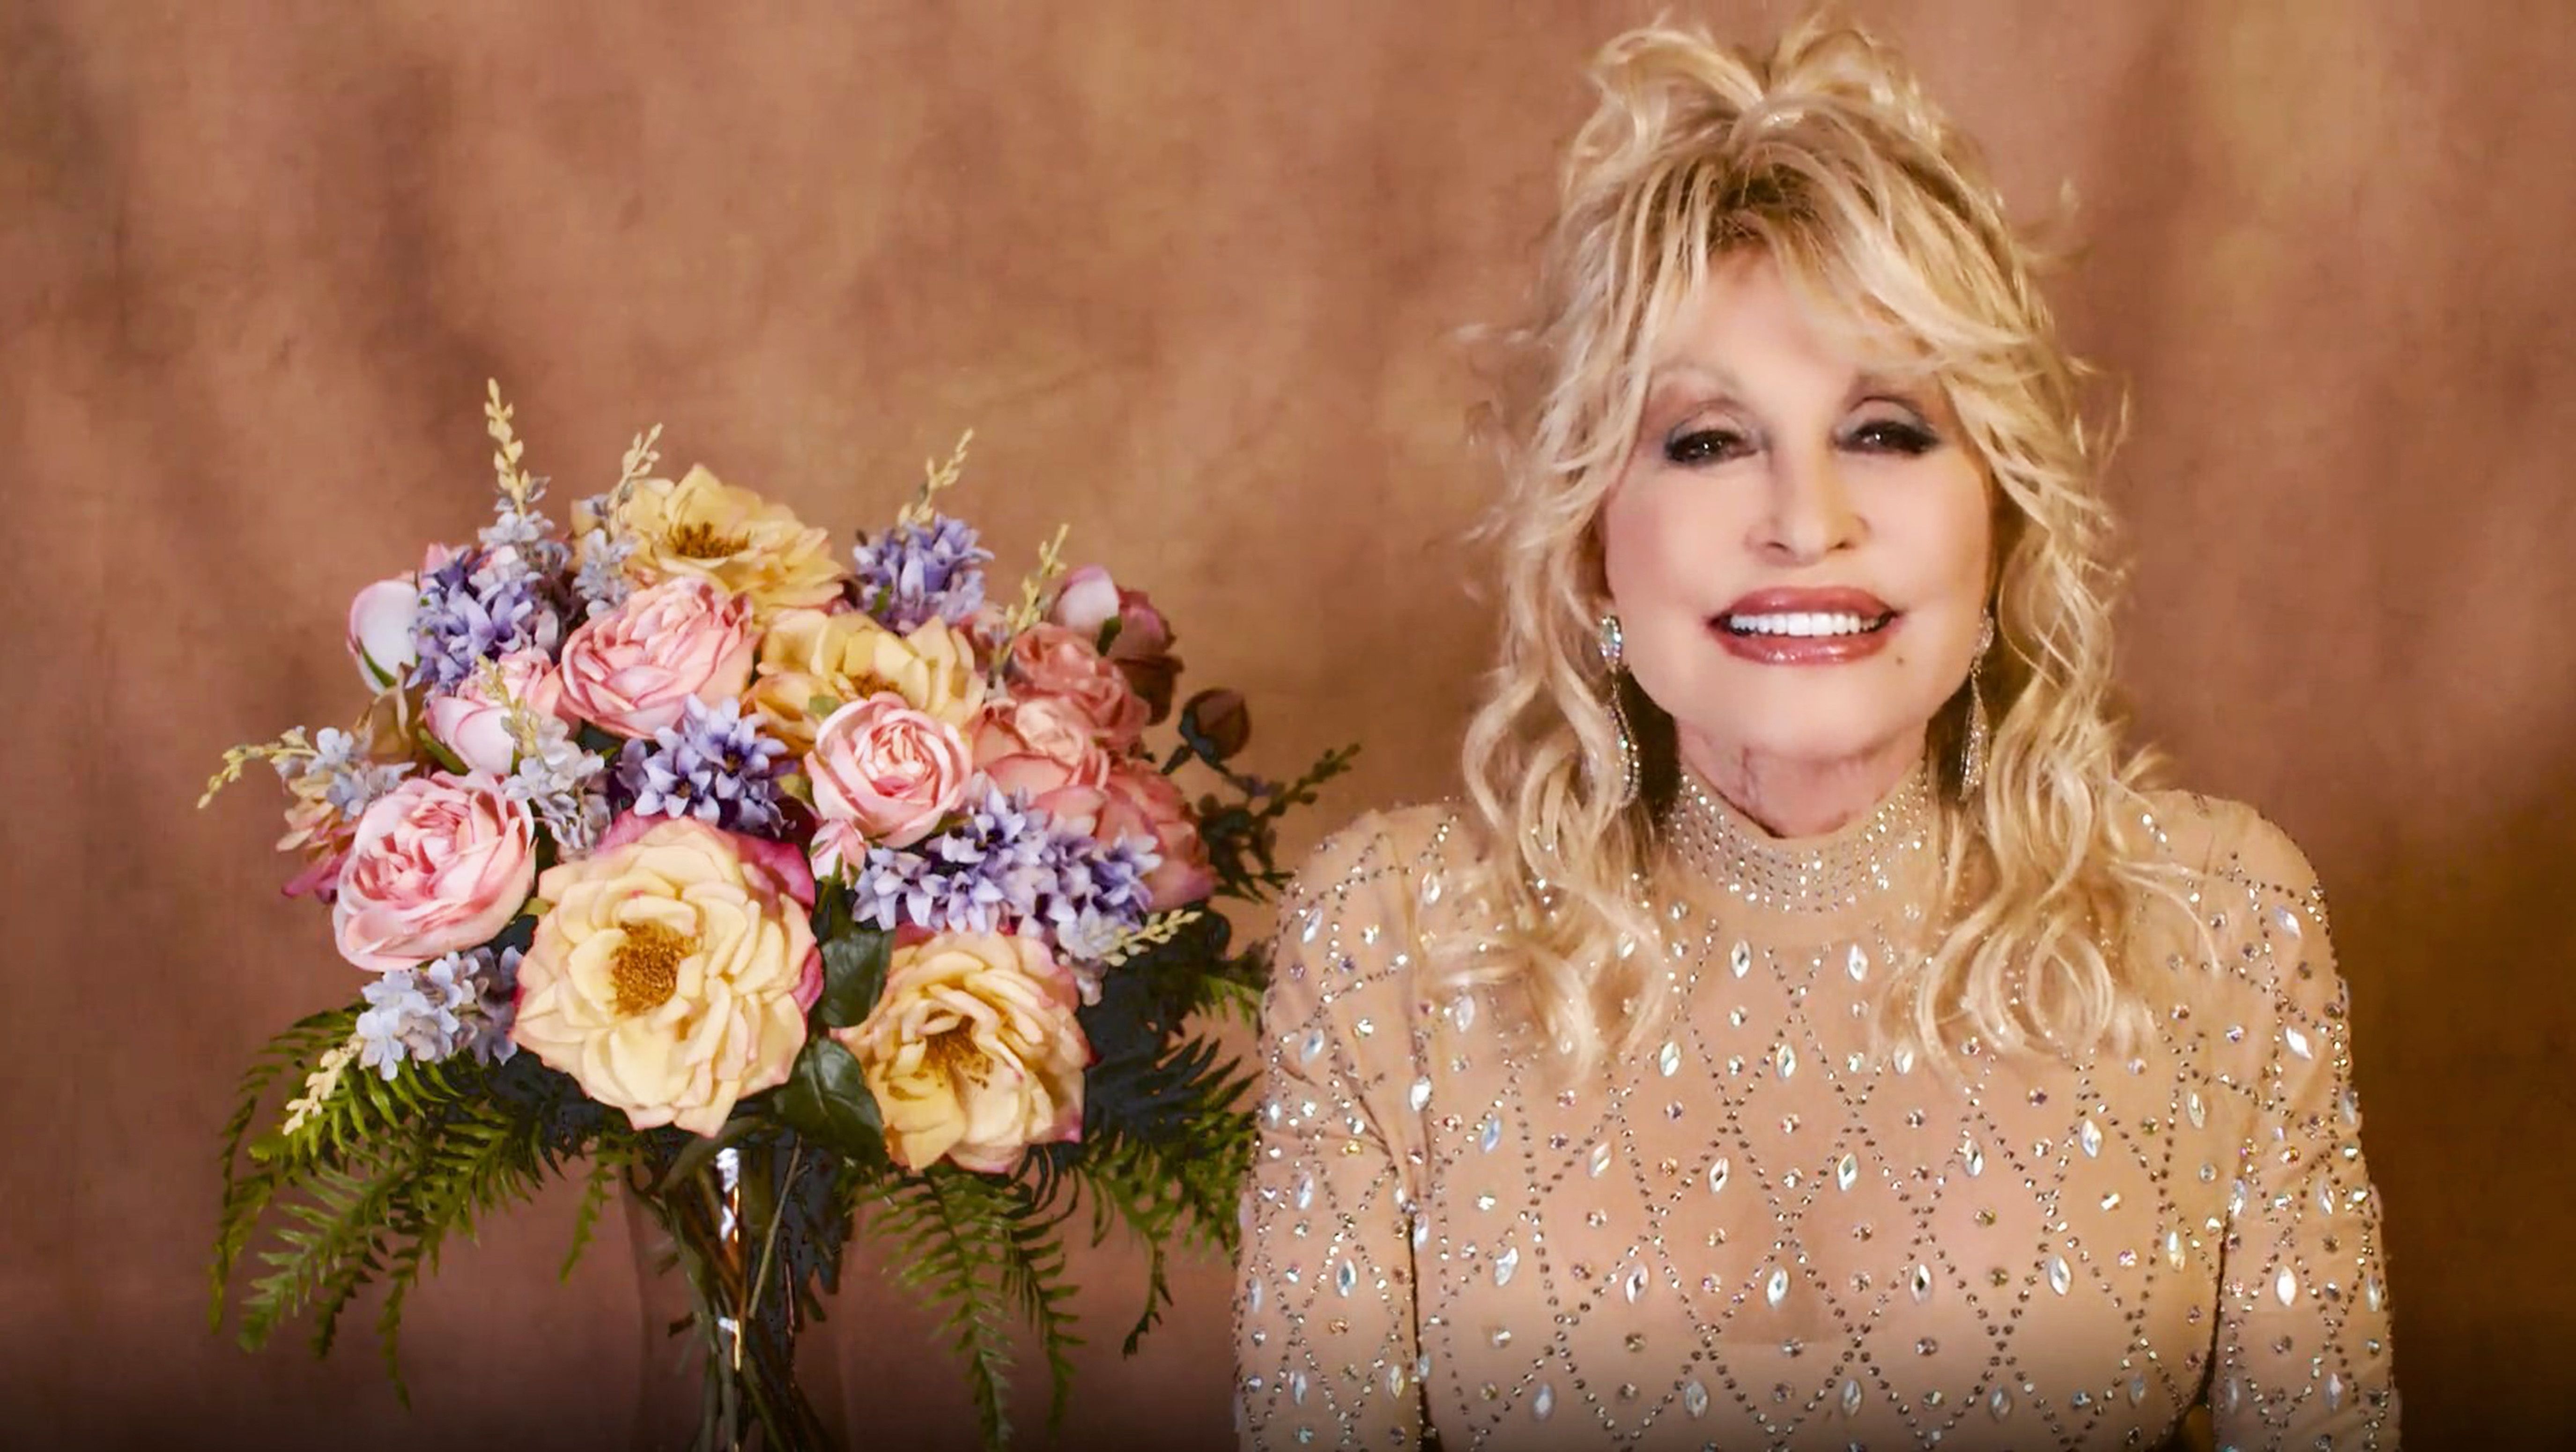 Dolly Parton speaks at the 56th Academy of Country Music Awards 